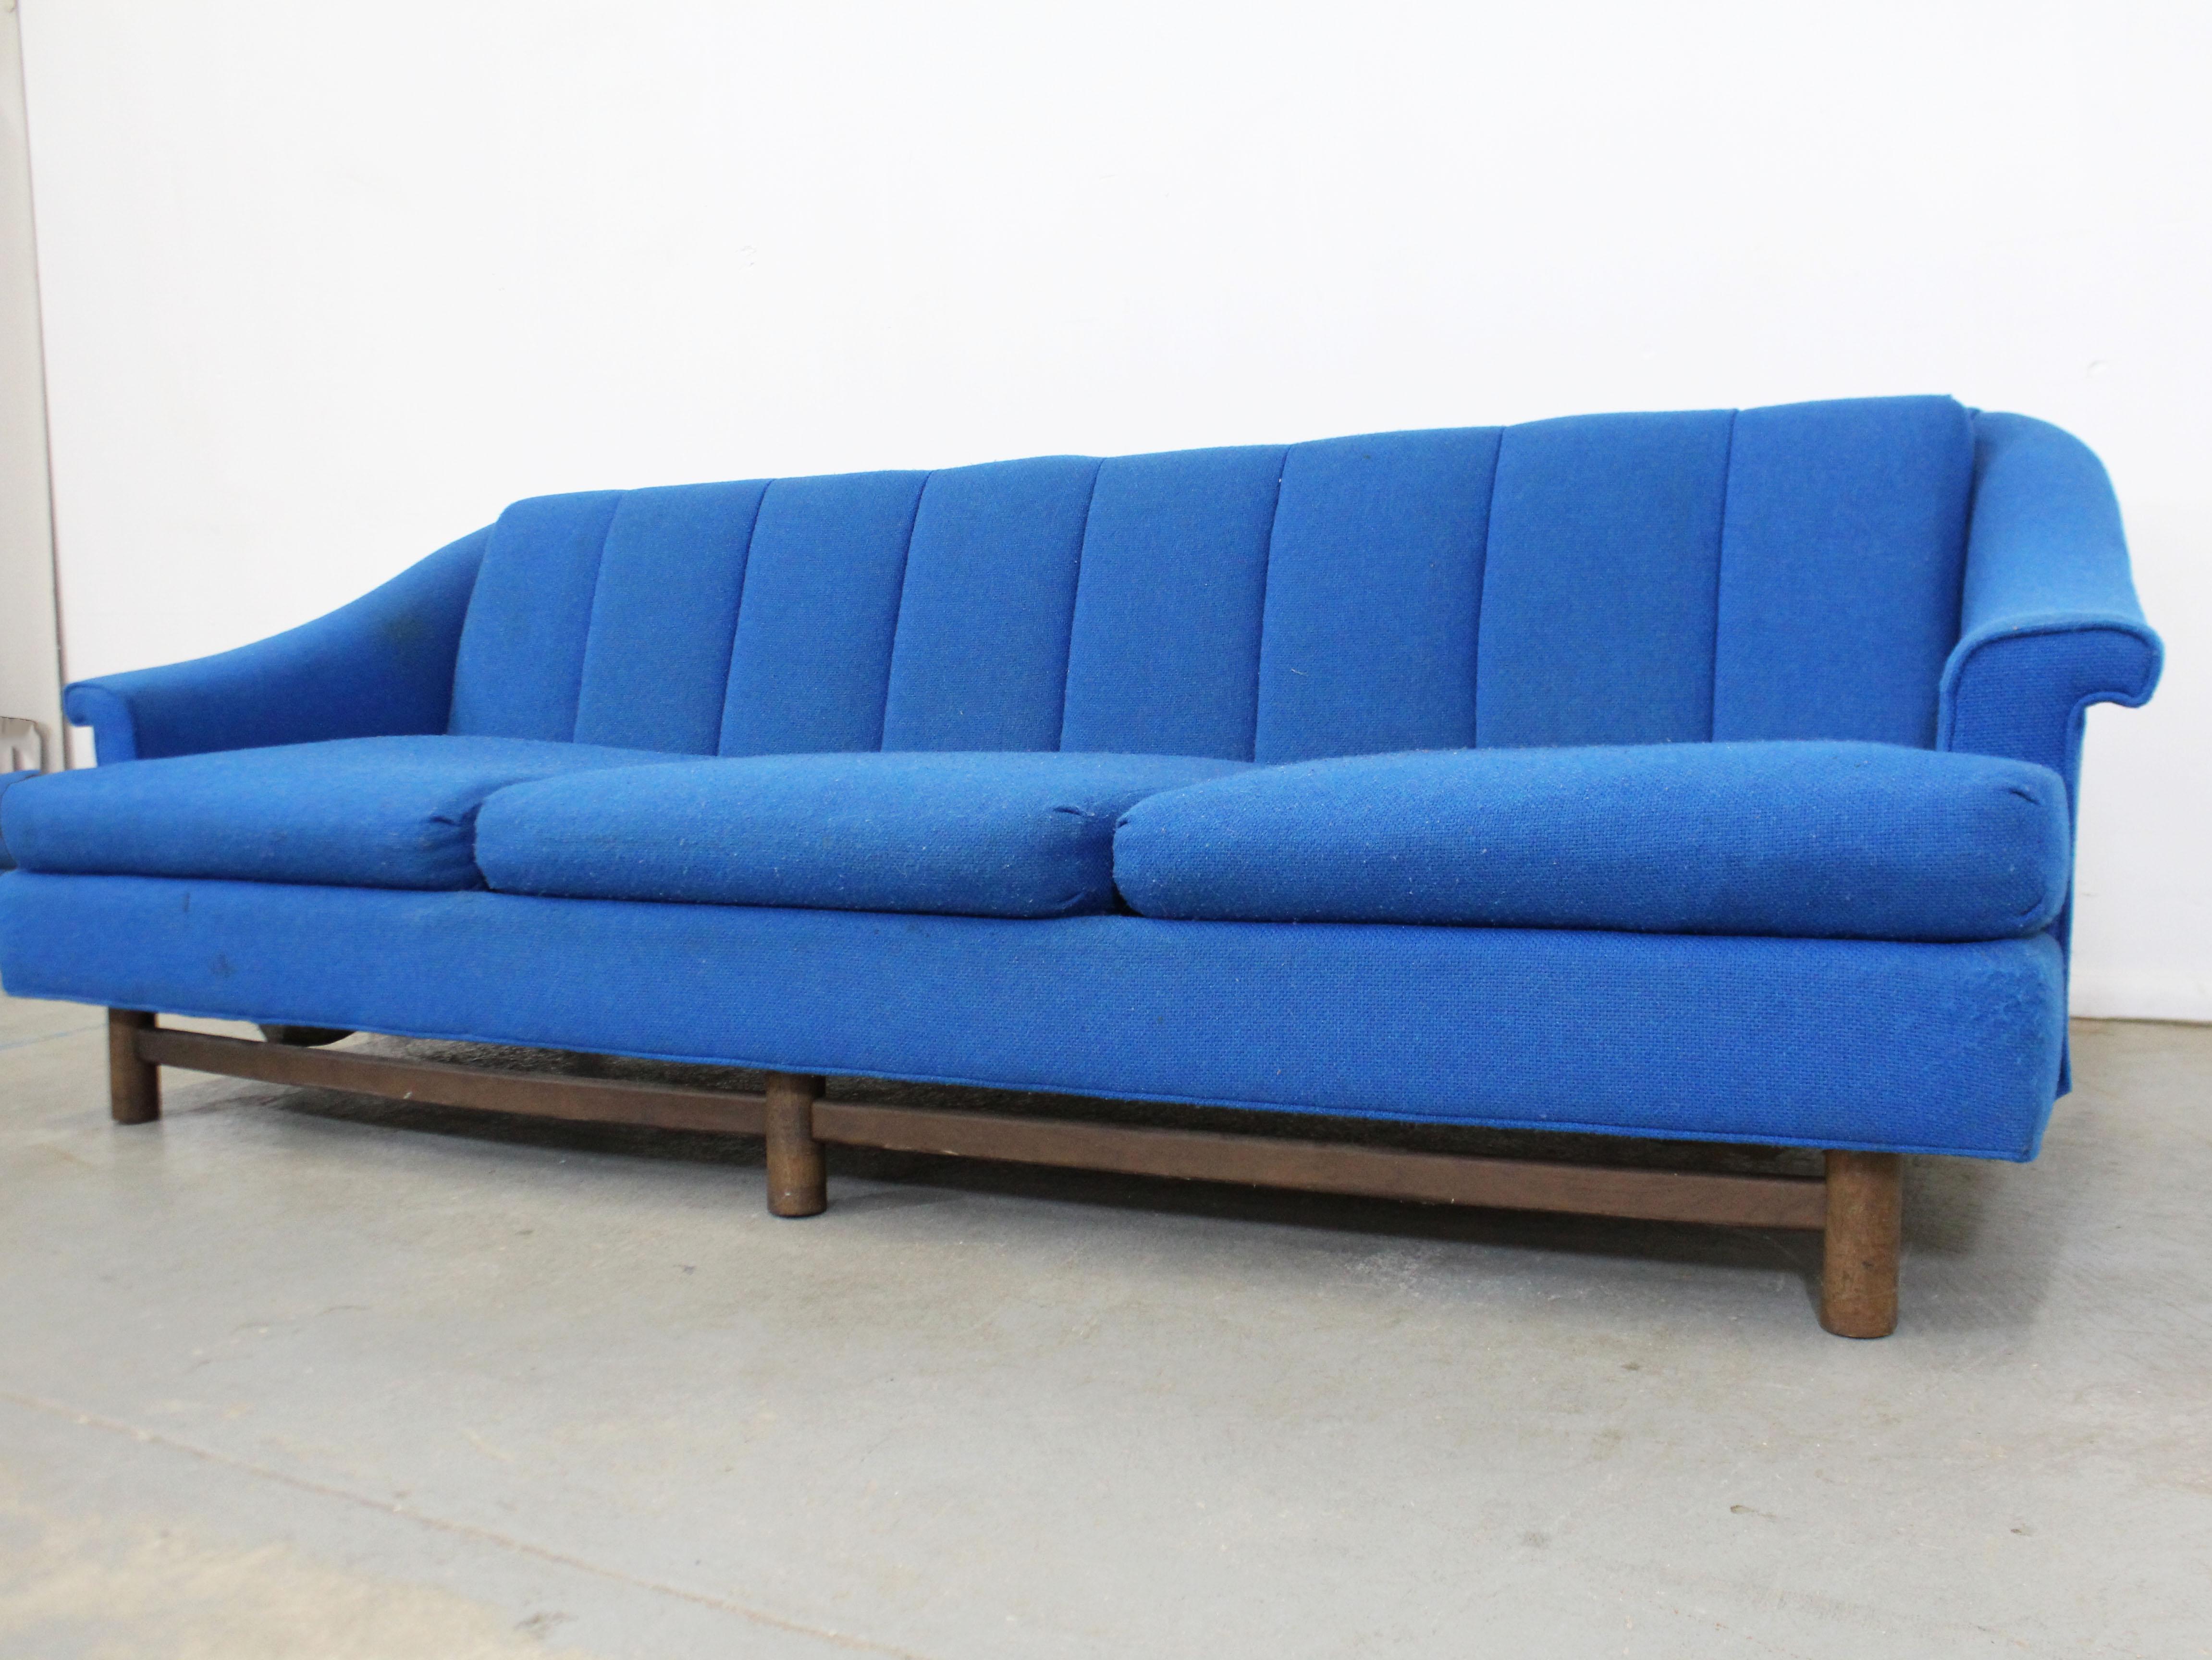 American Mid-Century Modern Blue 3-Seat Sofa on Wood Base For Sale